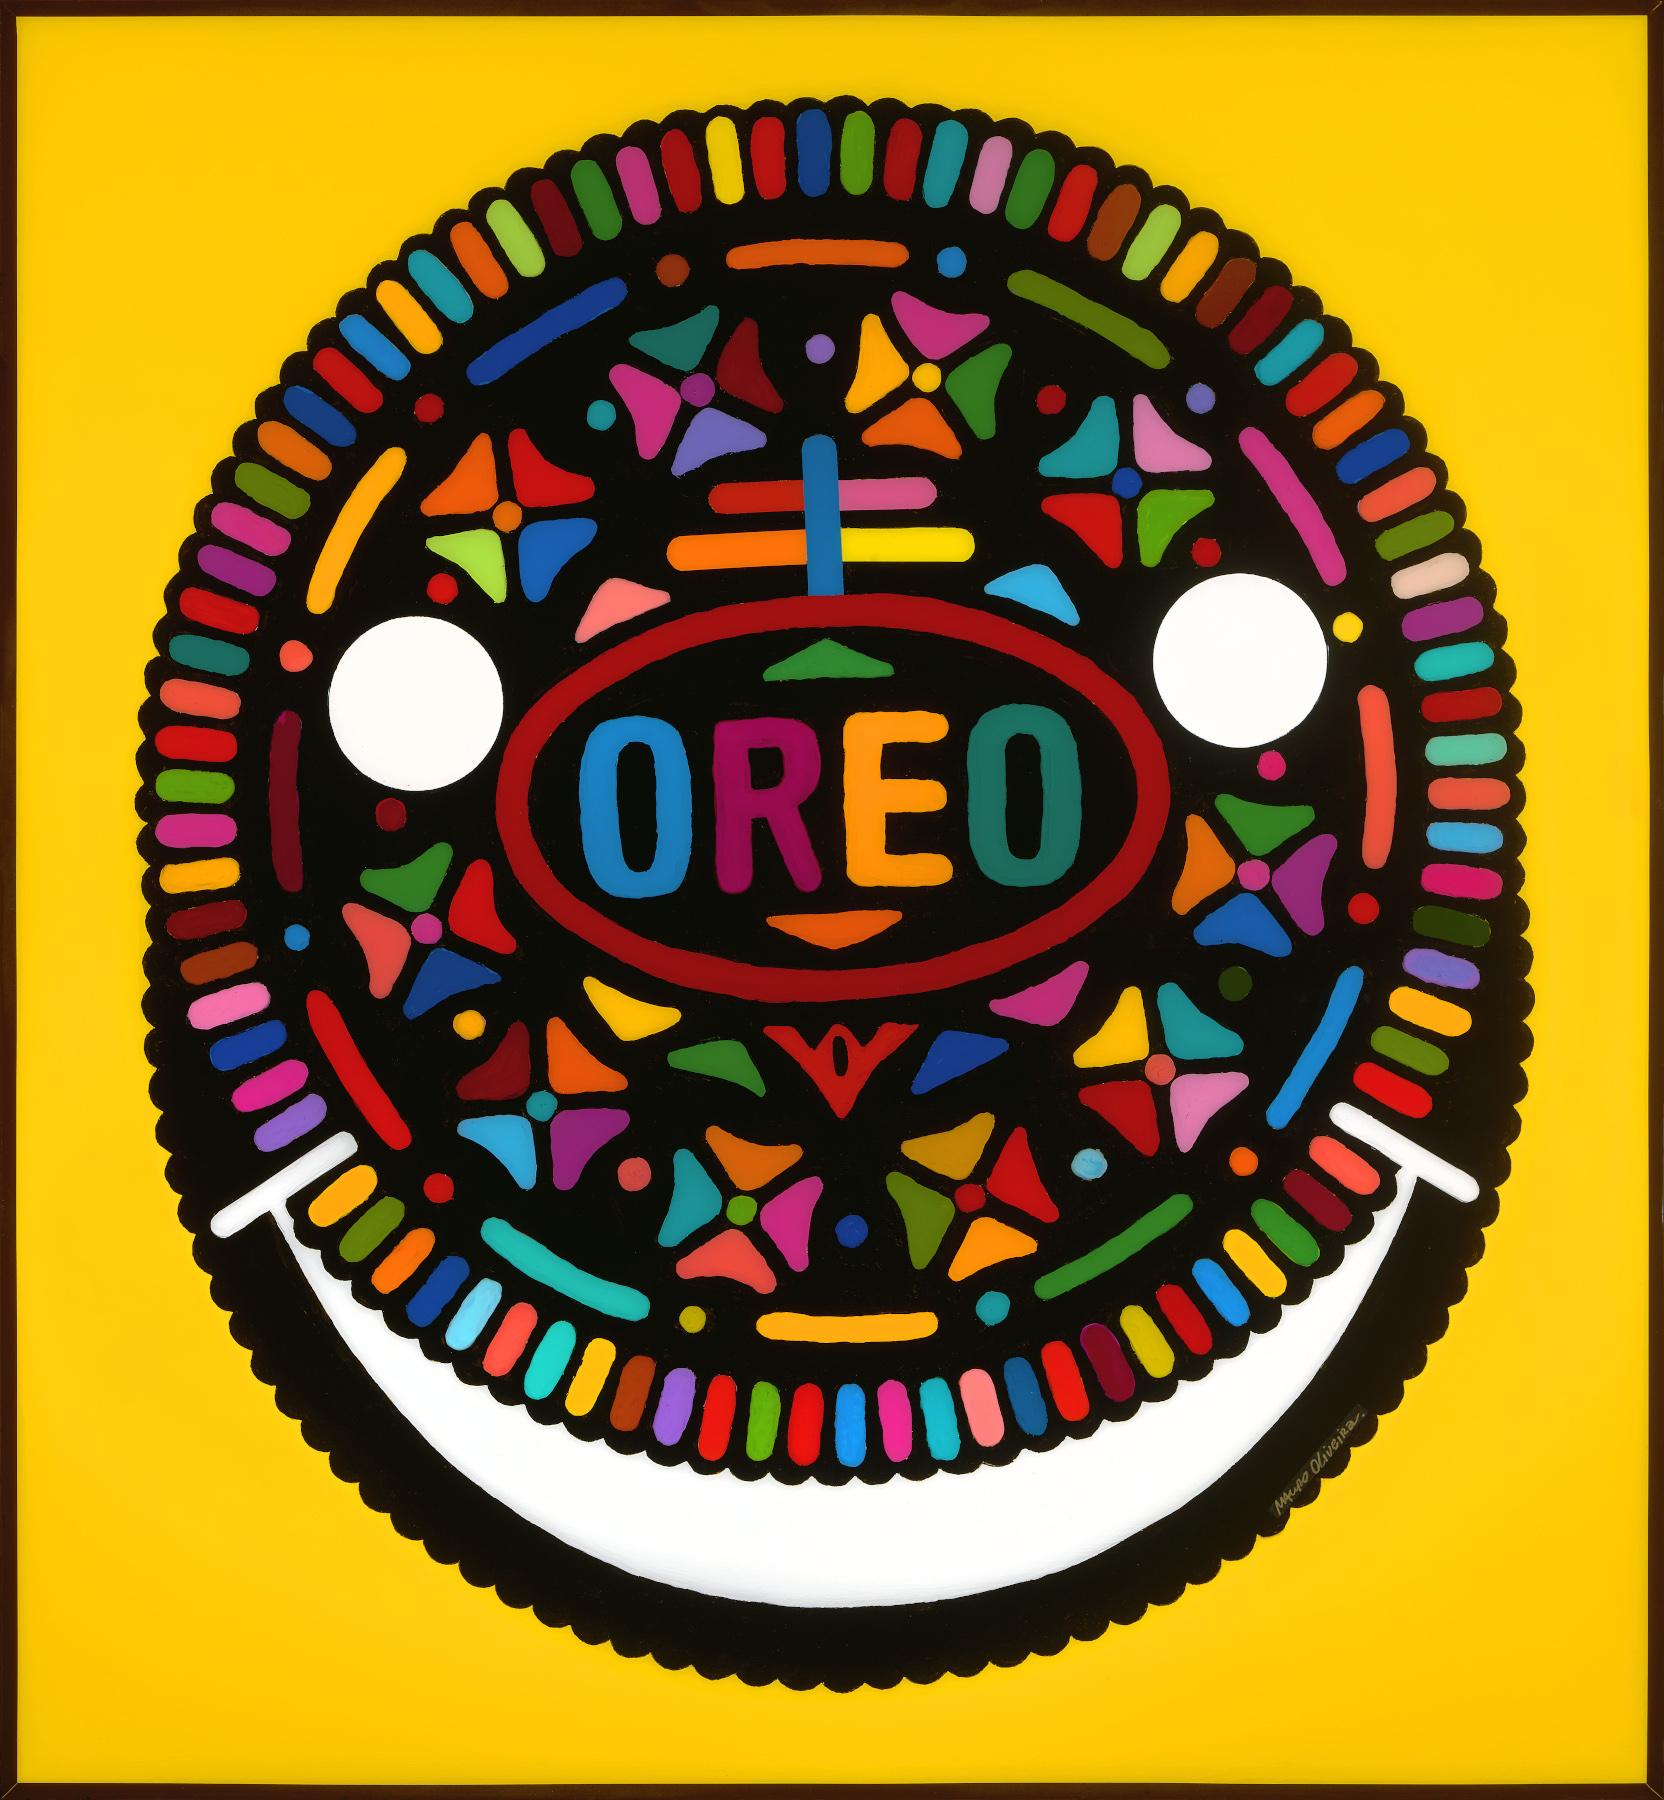 Mauro Oliveira Figurative Print - OREO HAPPY HOUR I (Limited Edition of only 30 prints)